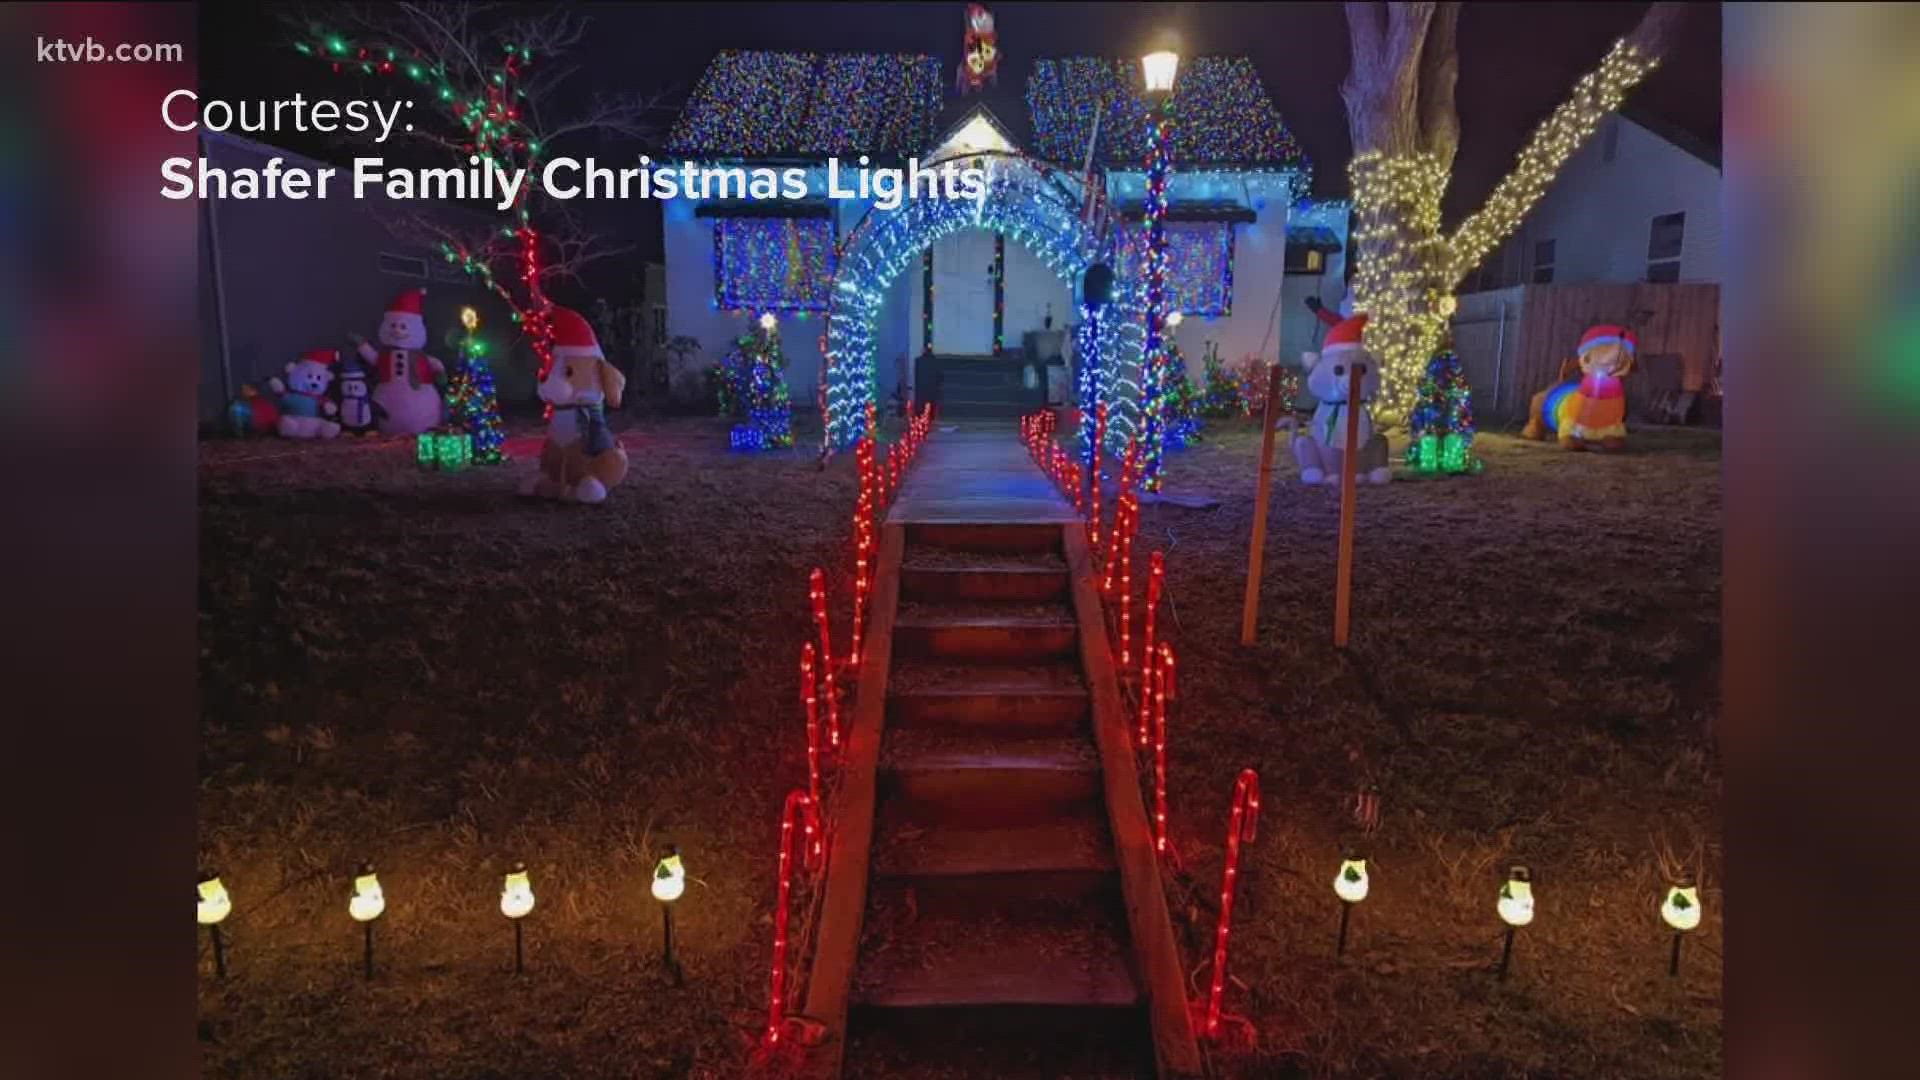 From Christmas tree lightings to decorating homes for the holiday, people in Canyon County are getting ready to celebrate Christmas with their community.